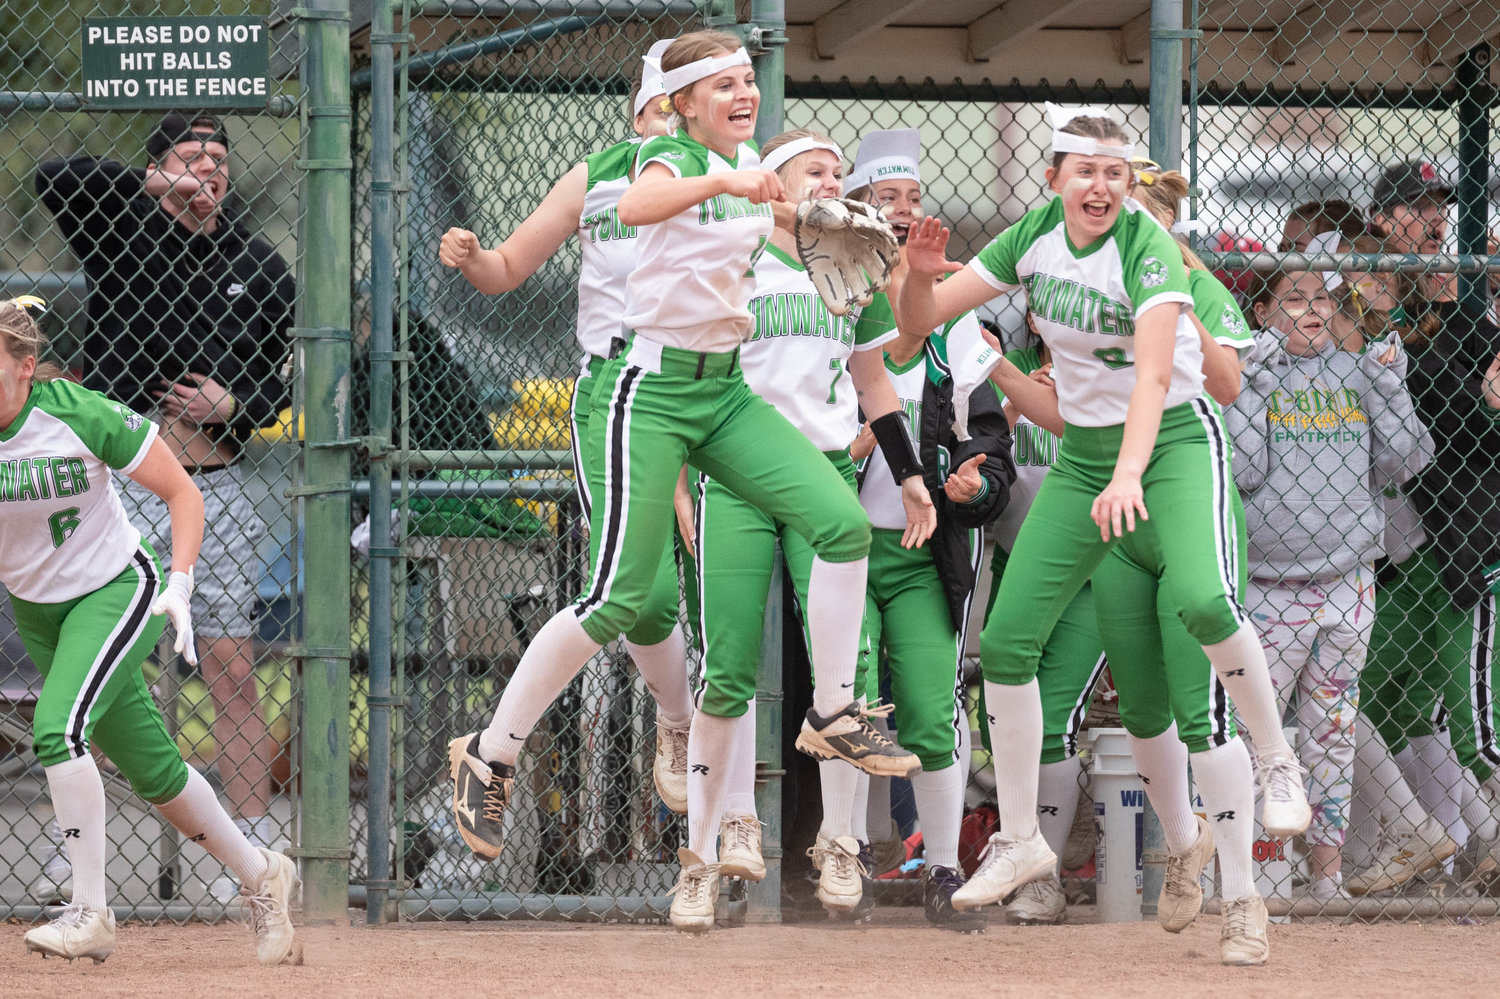 Tumwater's dugout reacts after Jaylene Manriquez's walk-off home run against Lynden in the 2A State Quarterfinals at Carlon Park in Selah May 27.